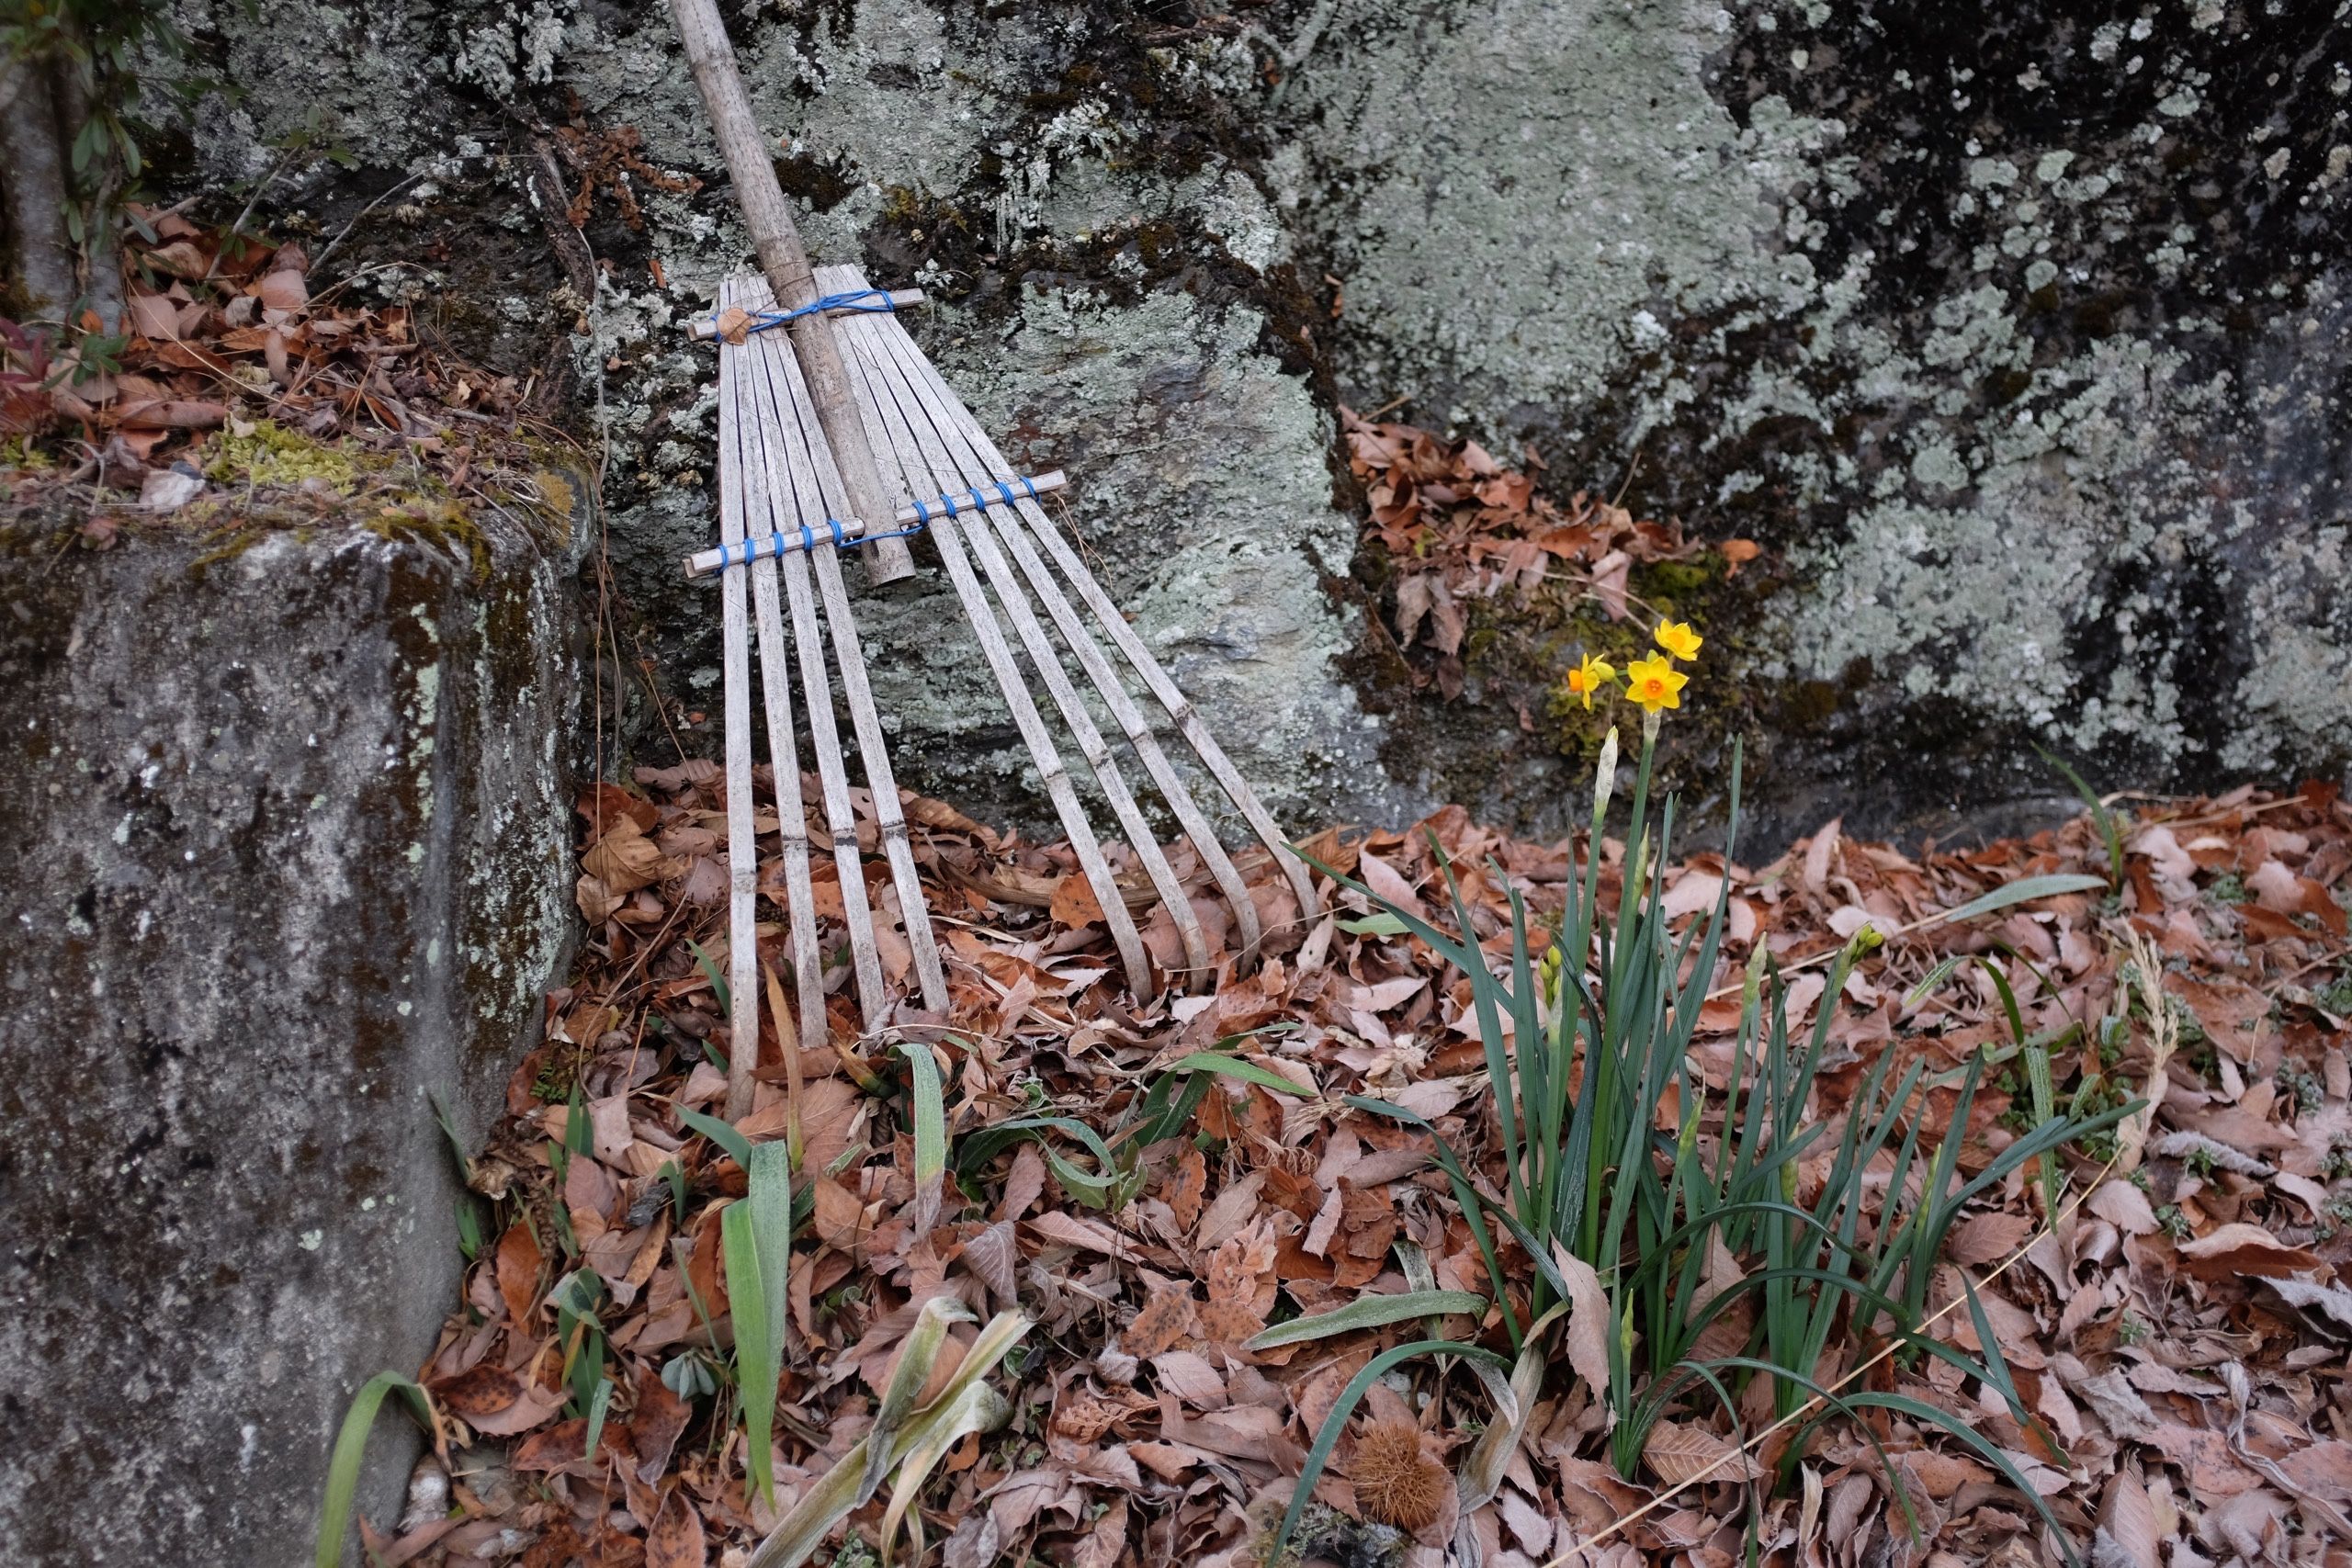 A winter narcissus blooms by a bamboo rake.